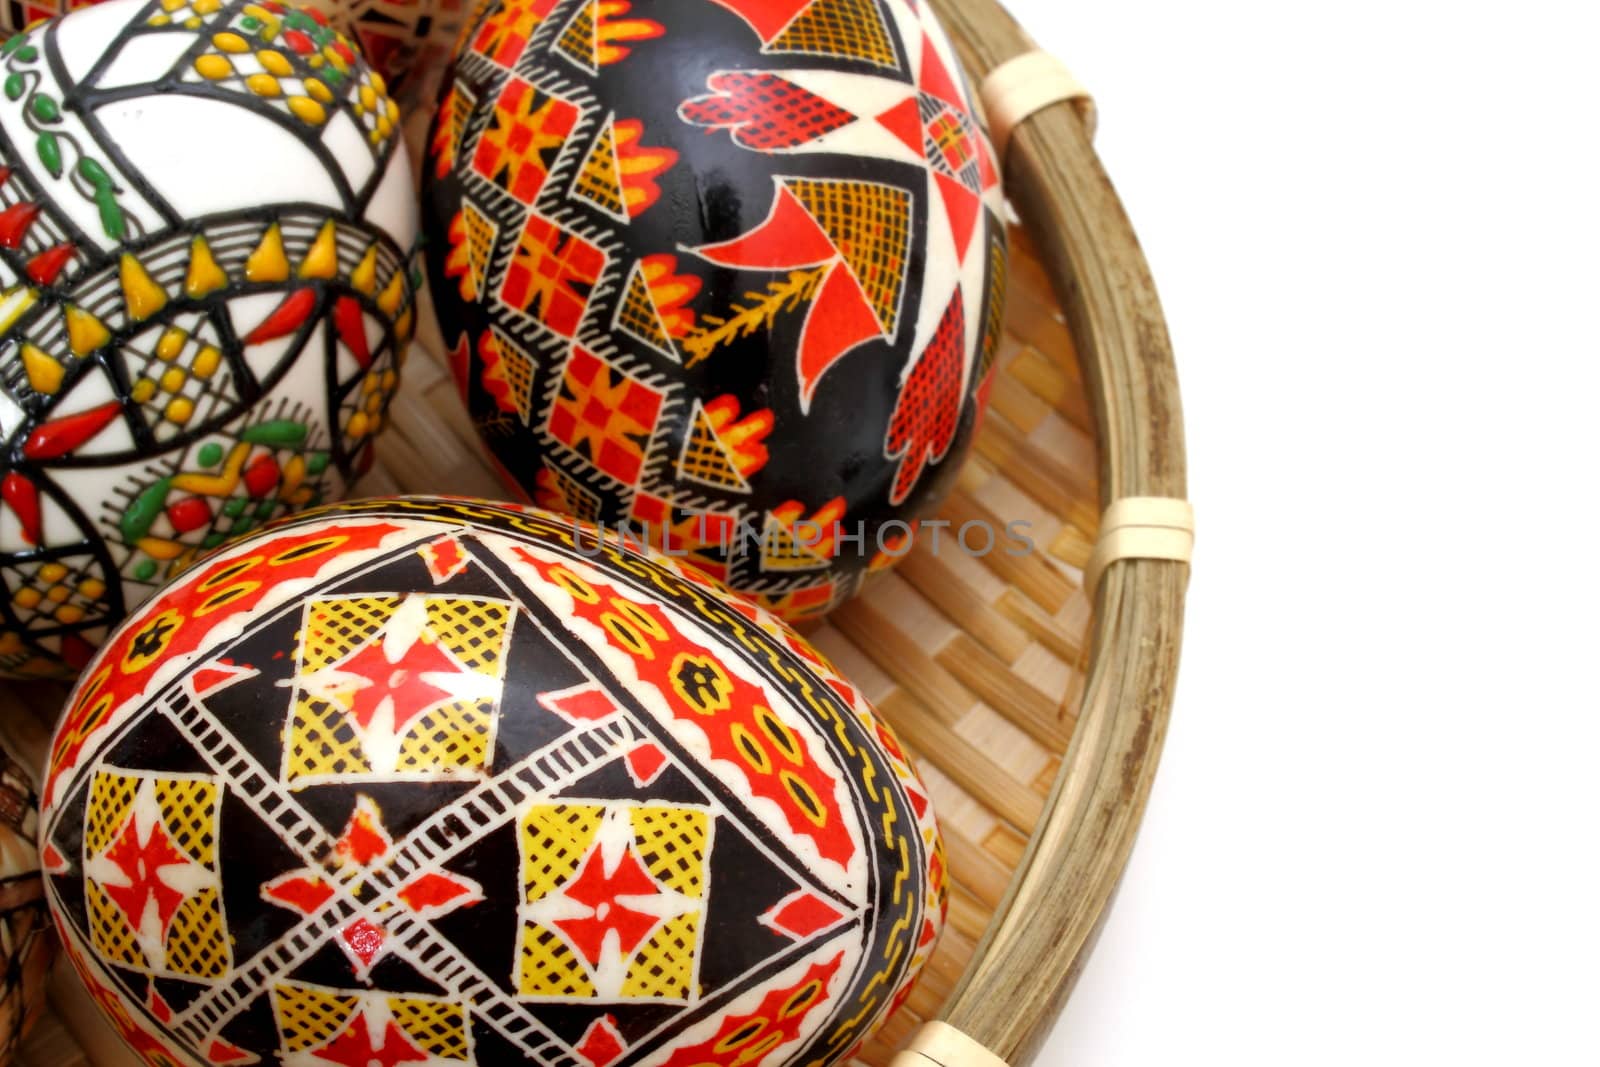 hand painted eggs in trellis basket over white background